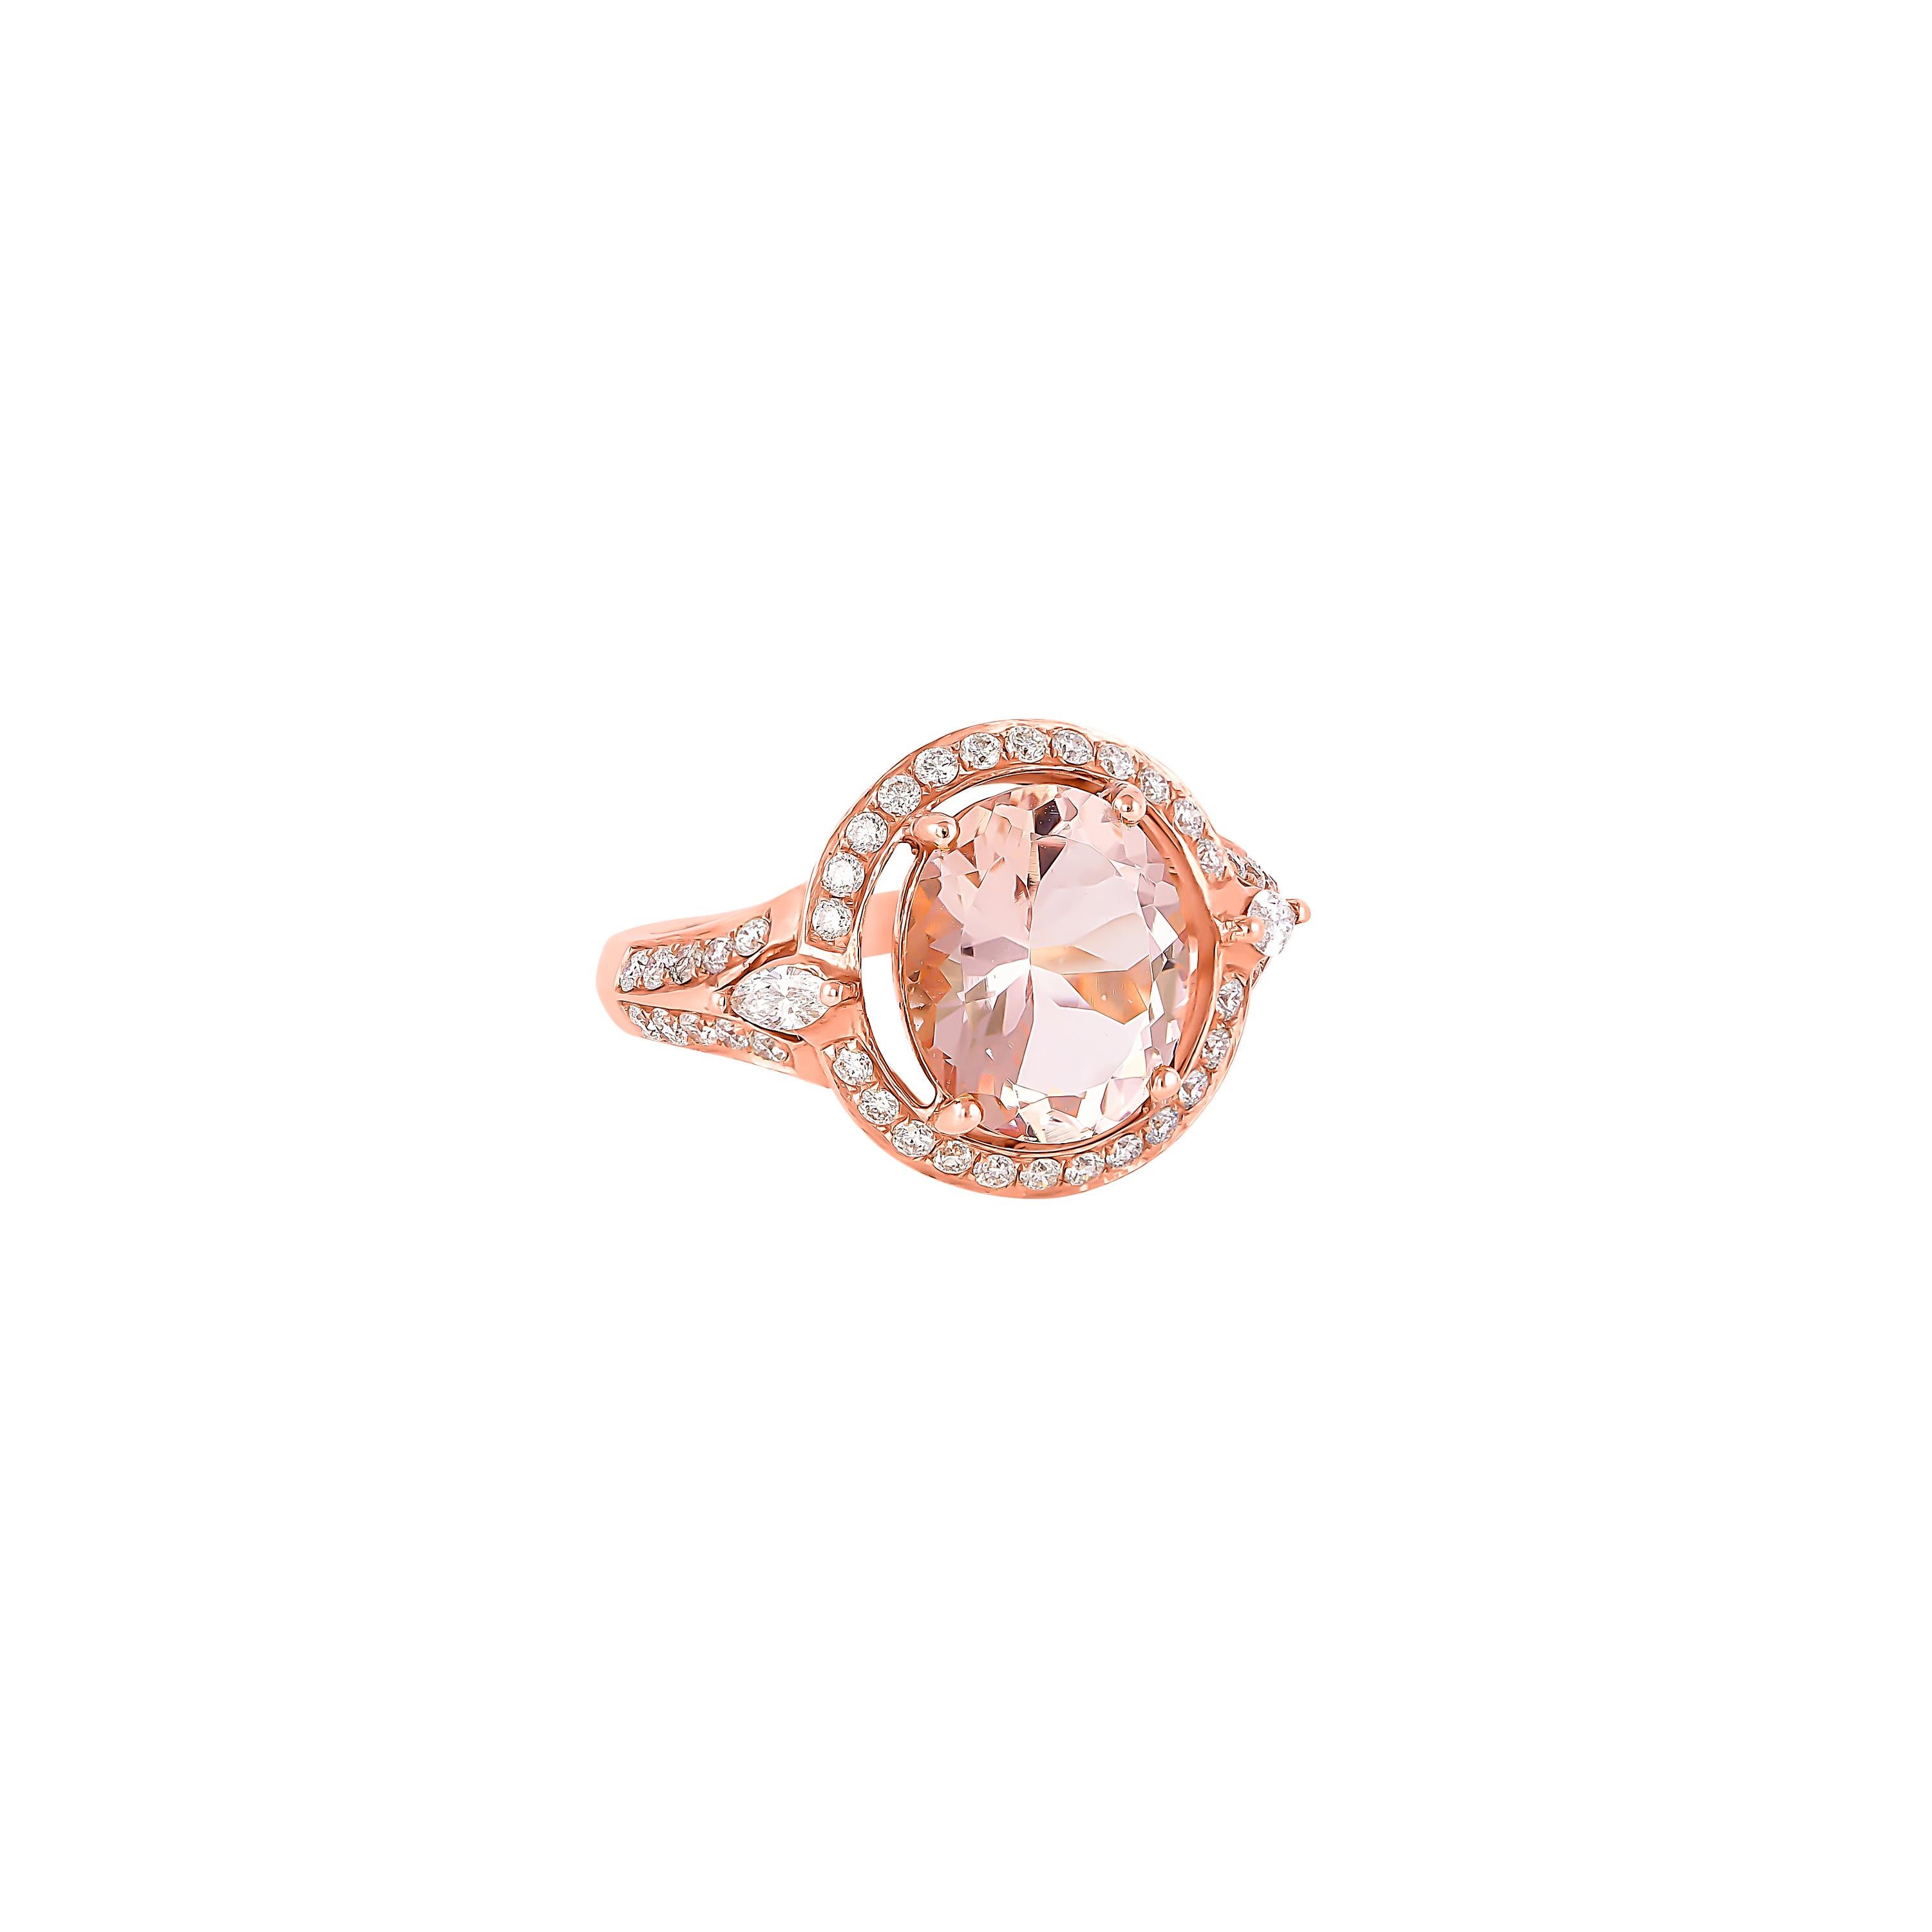 This collection features an array of magnificent morganites! Accented with diamonds these rings are made in rose gold and present a classic yet elegant look. 

Classic morganite ring in 18K rose gold with diamonds. 

Morganite: 2.5 carat oval